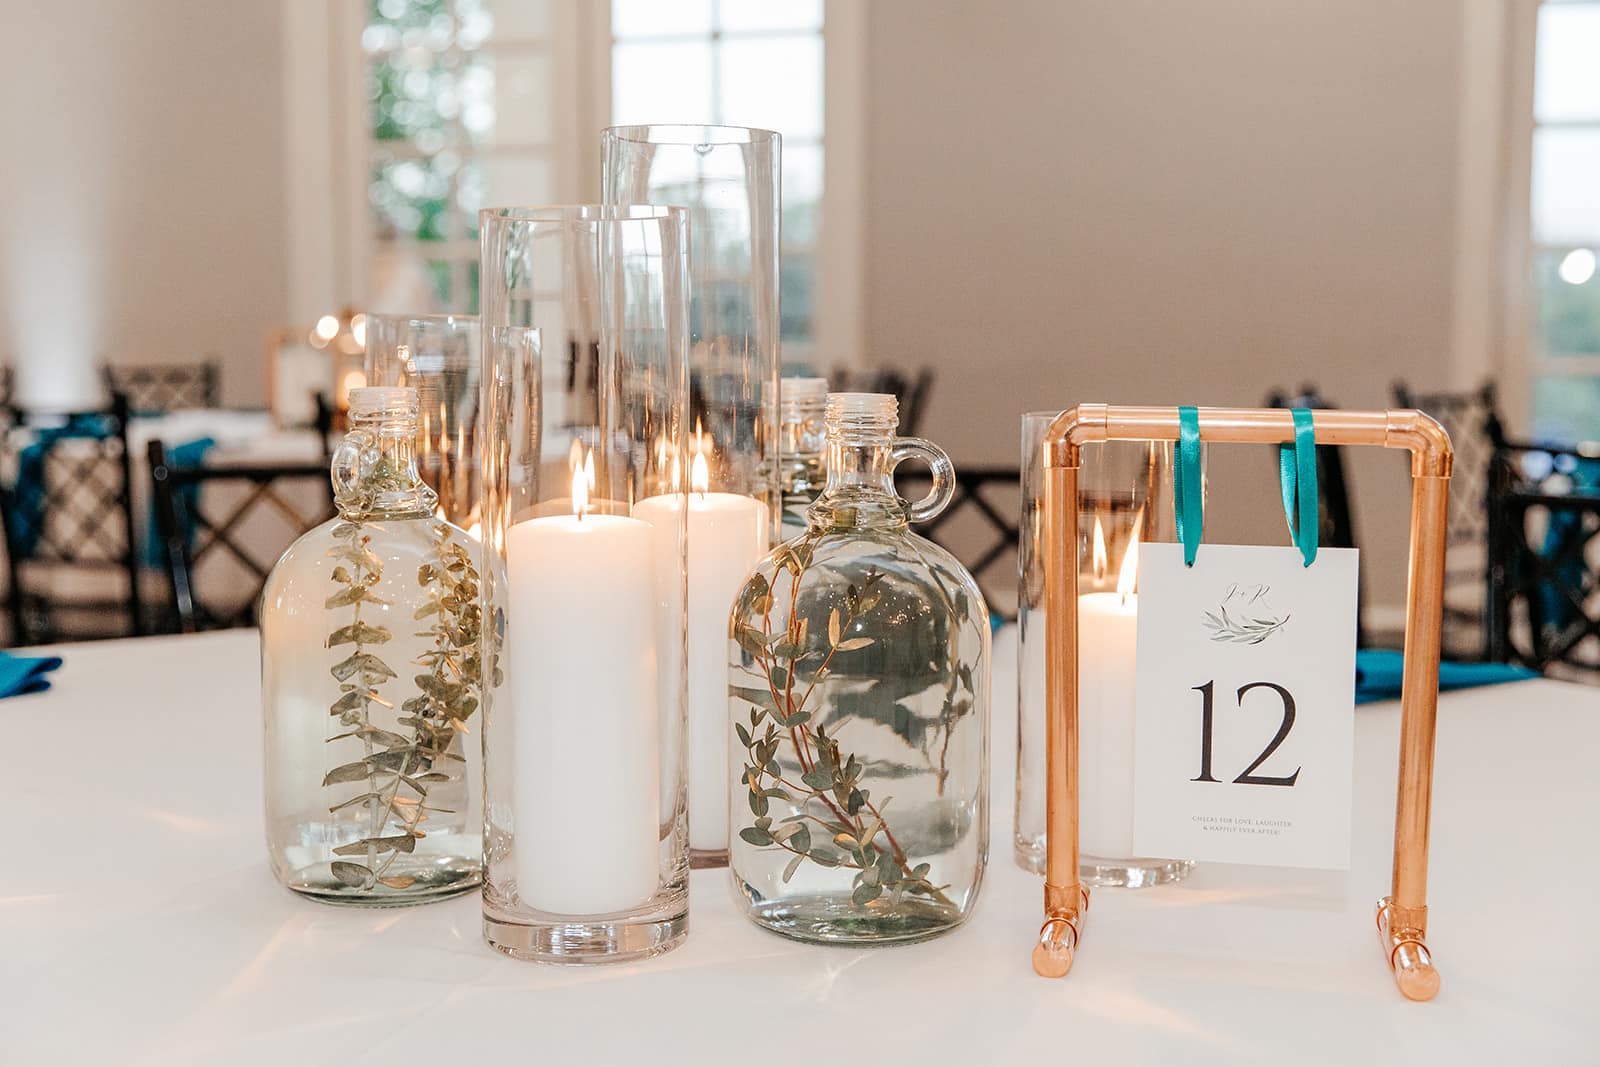 wedding centerpieces with greenery submerged in glass jars